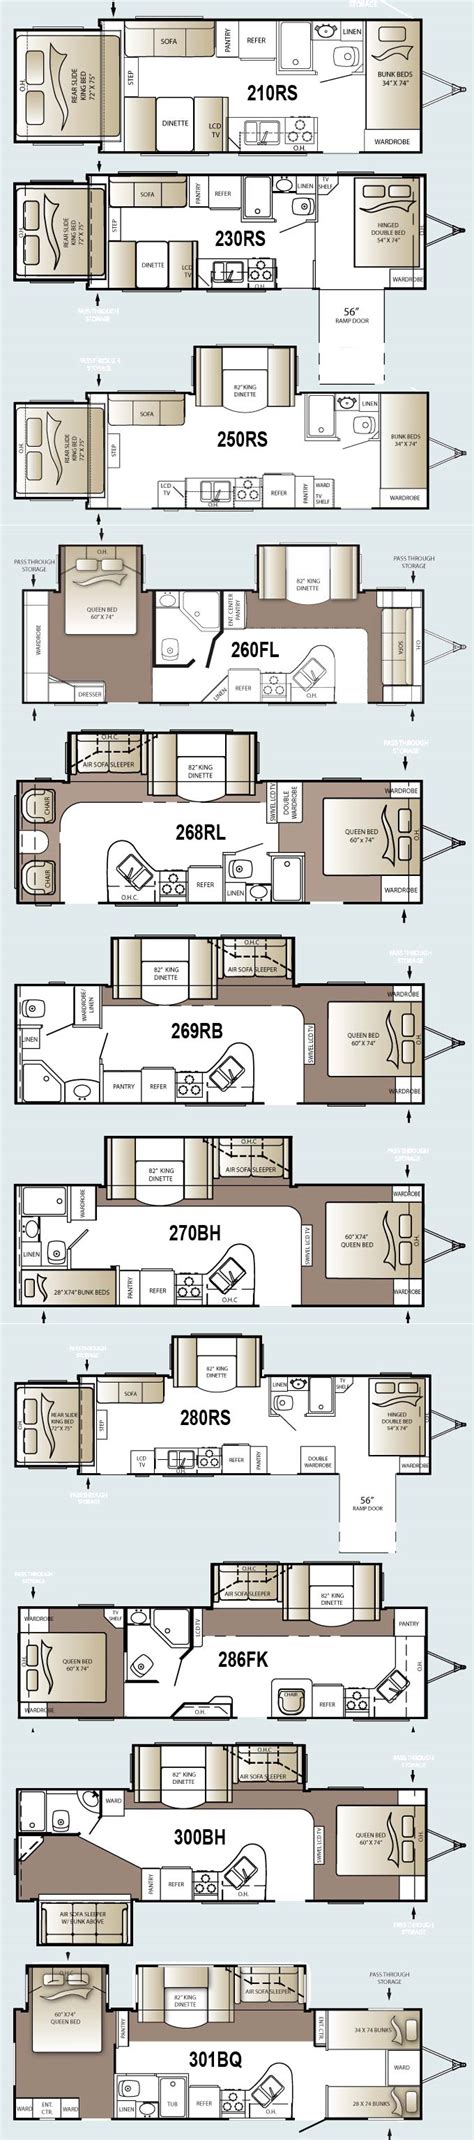 Are you looking for a free and easy way to create professional floor plan drawings? Look no further. With the advancements in technology, there are now several free floor plan drawing software options available that can help you create accu.... 